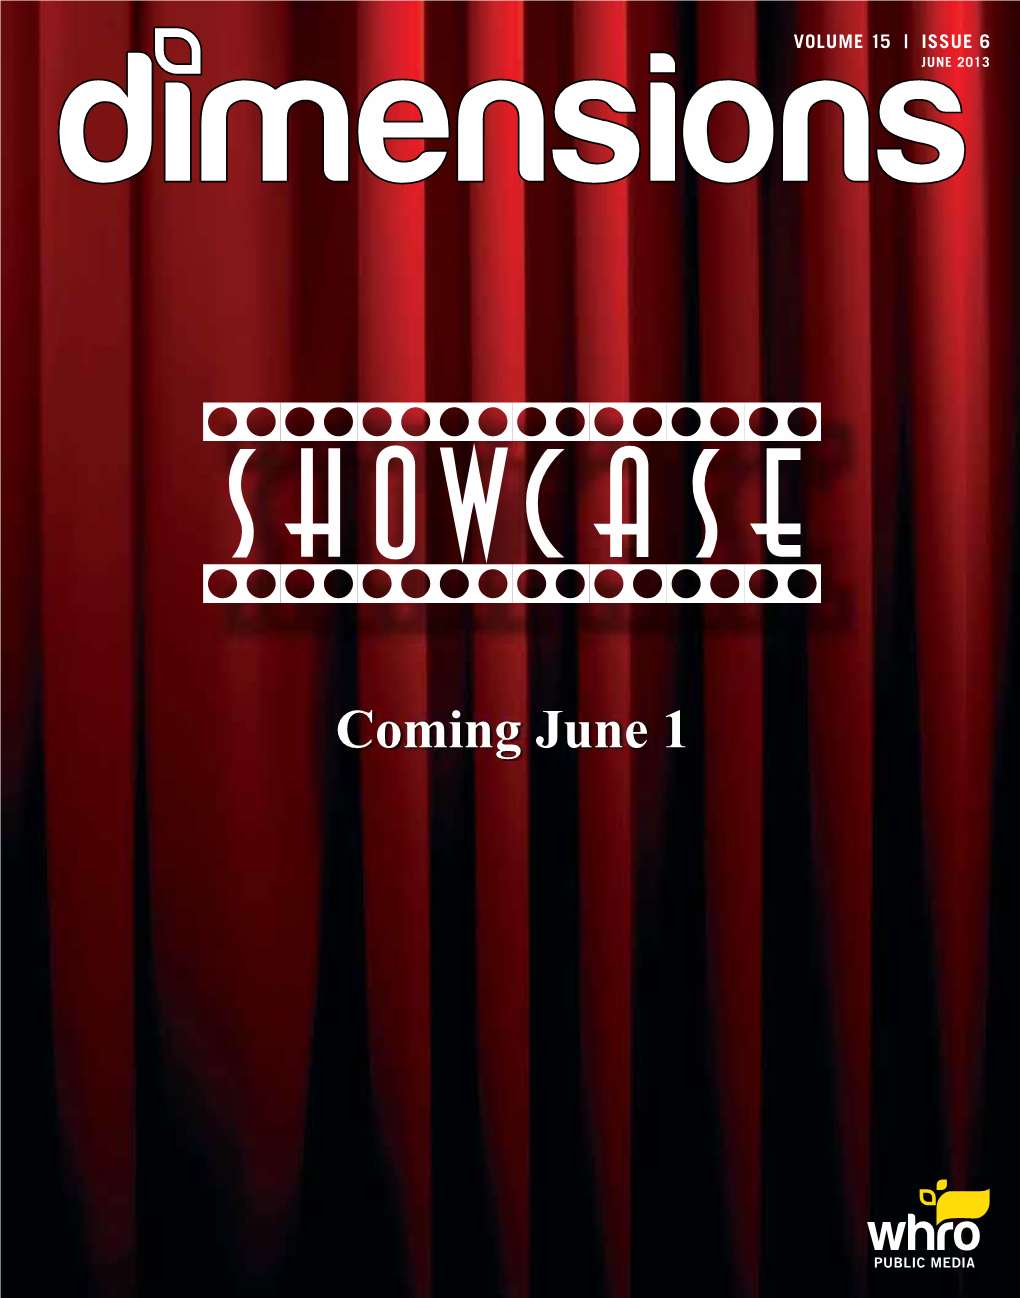 Coming June 1 from the Chief Executive Officer